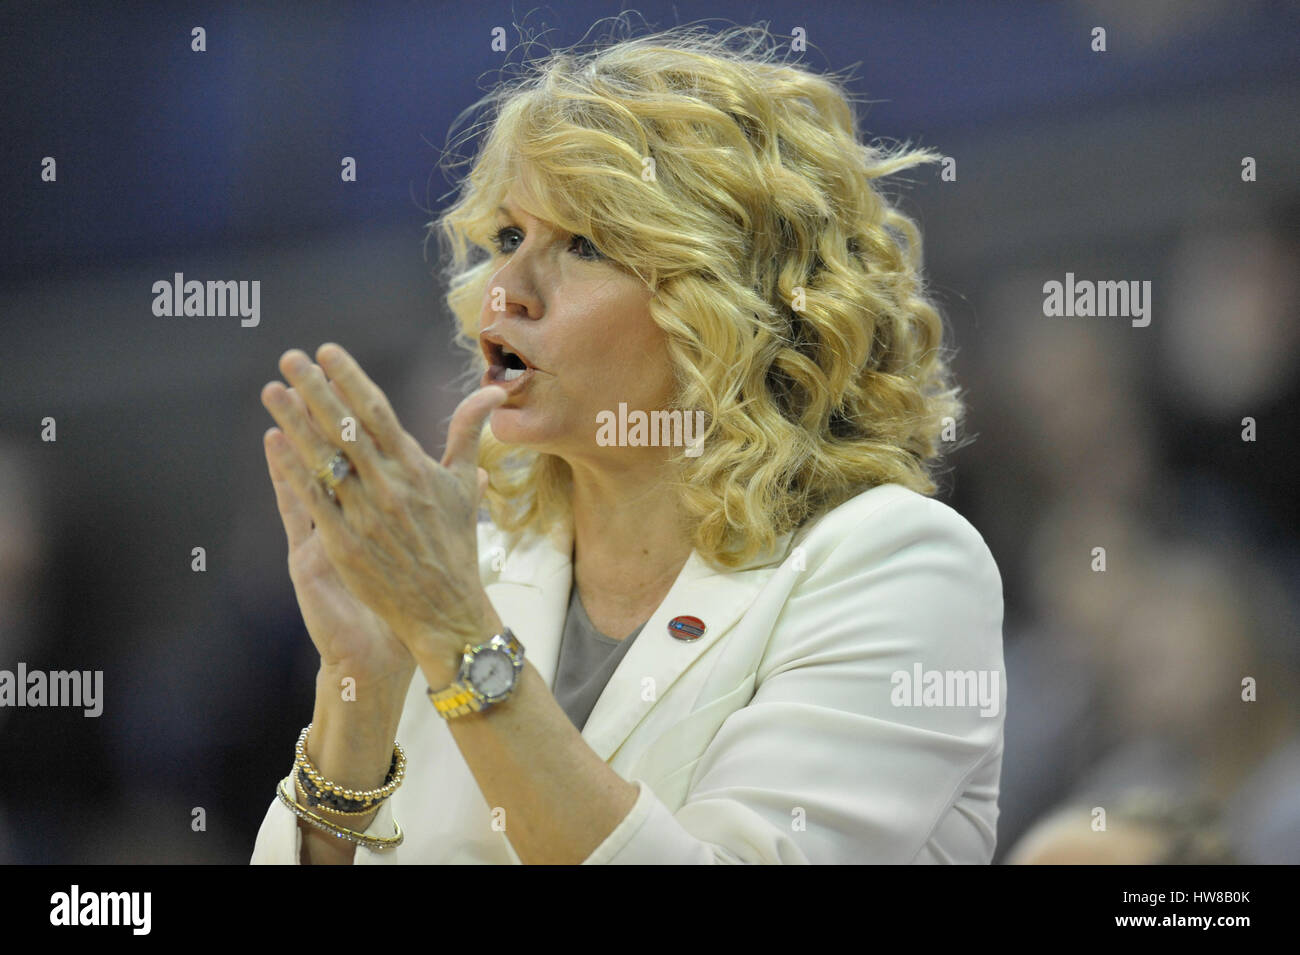 Seattle, WA, USA. 18th Mar, 2017. Oklahoma Head Coach Sherri Coale cherring on her team during a NCAA first round women's game between the Gonzaga Bulldogs and the Oklahoma Sooners. The game was played at Hec Ed Pavilion on the University of Washington campus in Seattle, WA. Jeff Halstead/CSM/Alamy Live News Stock Photo